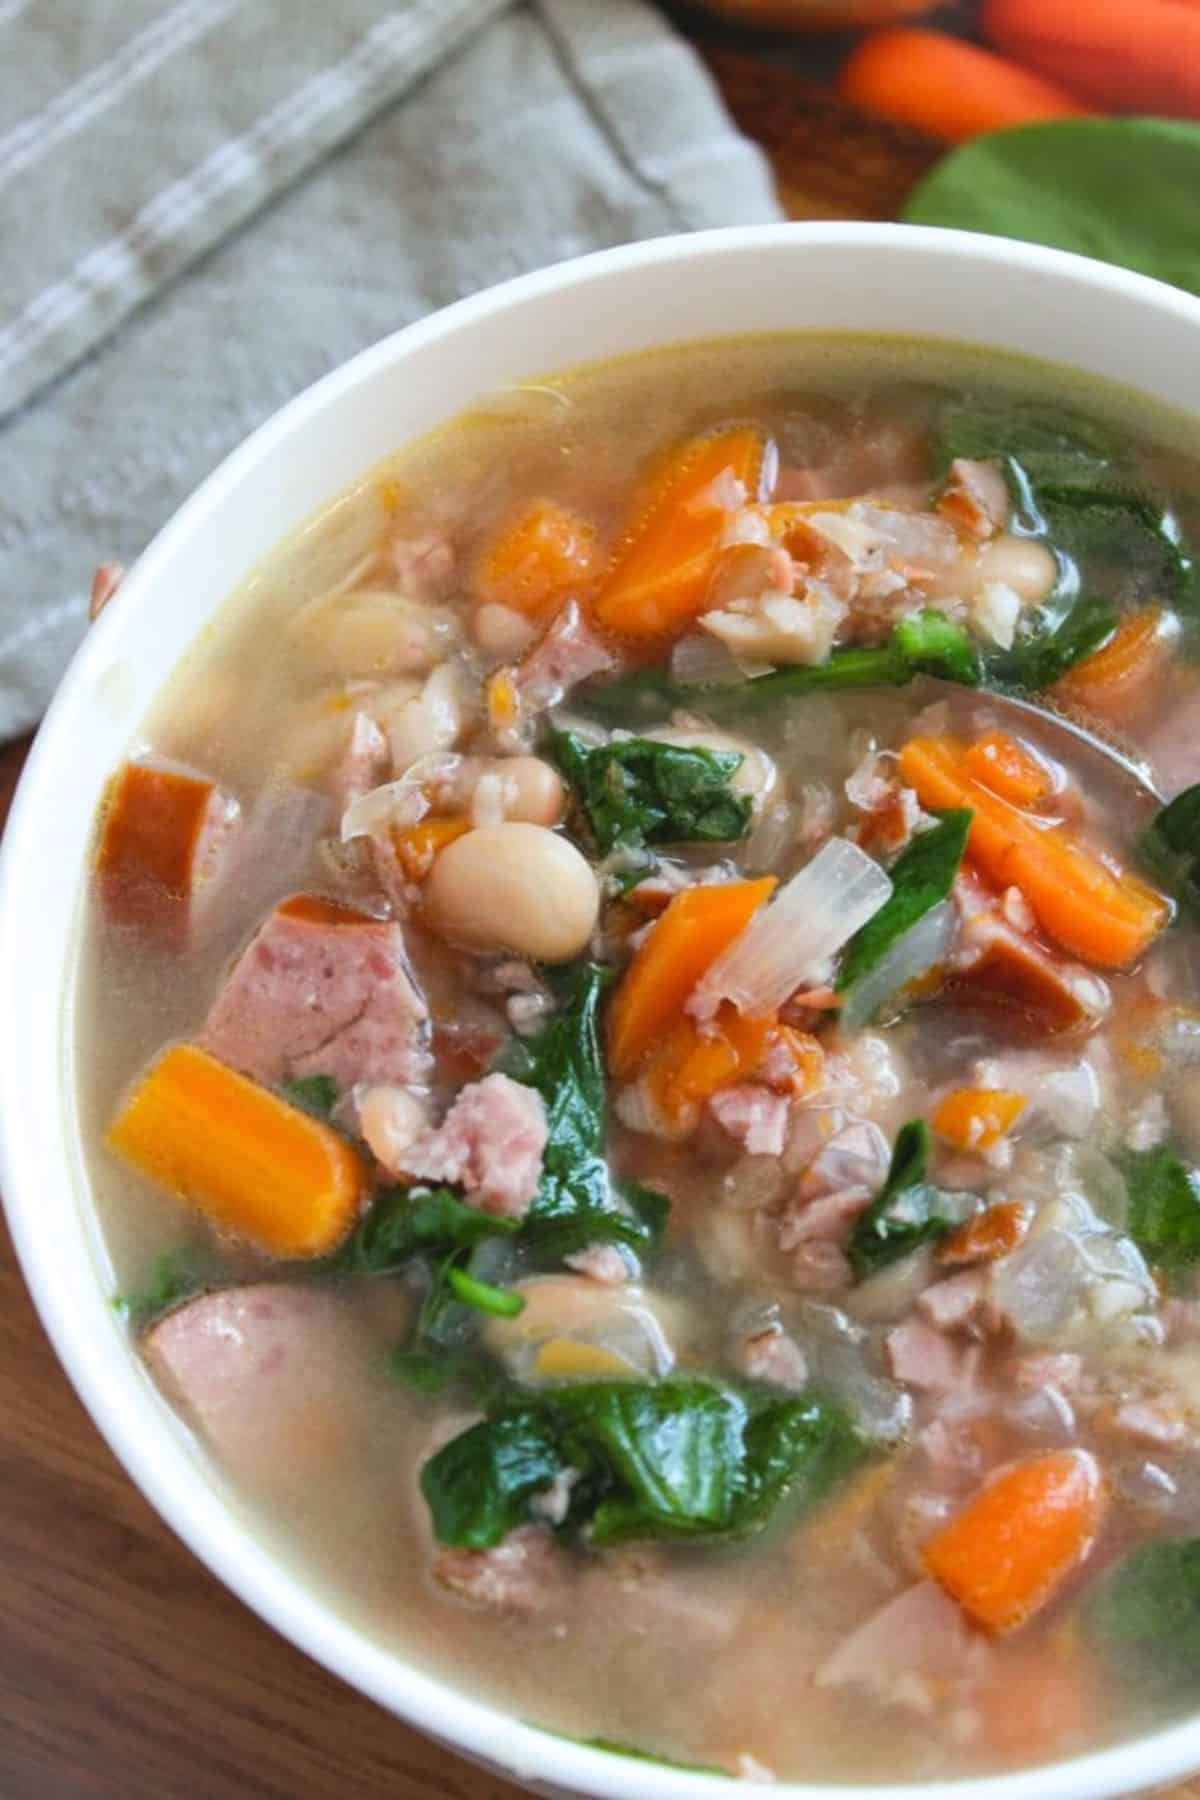 A hearty bowl of sausage and bean soup with carrots and spinach.